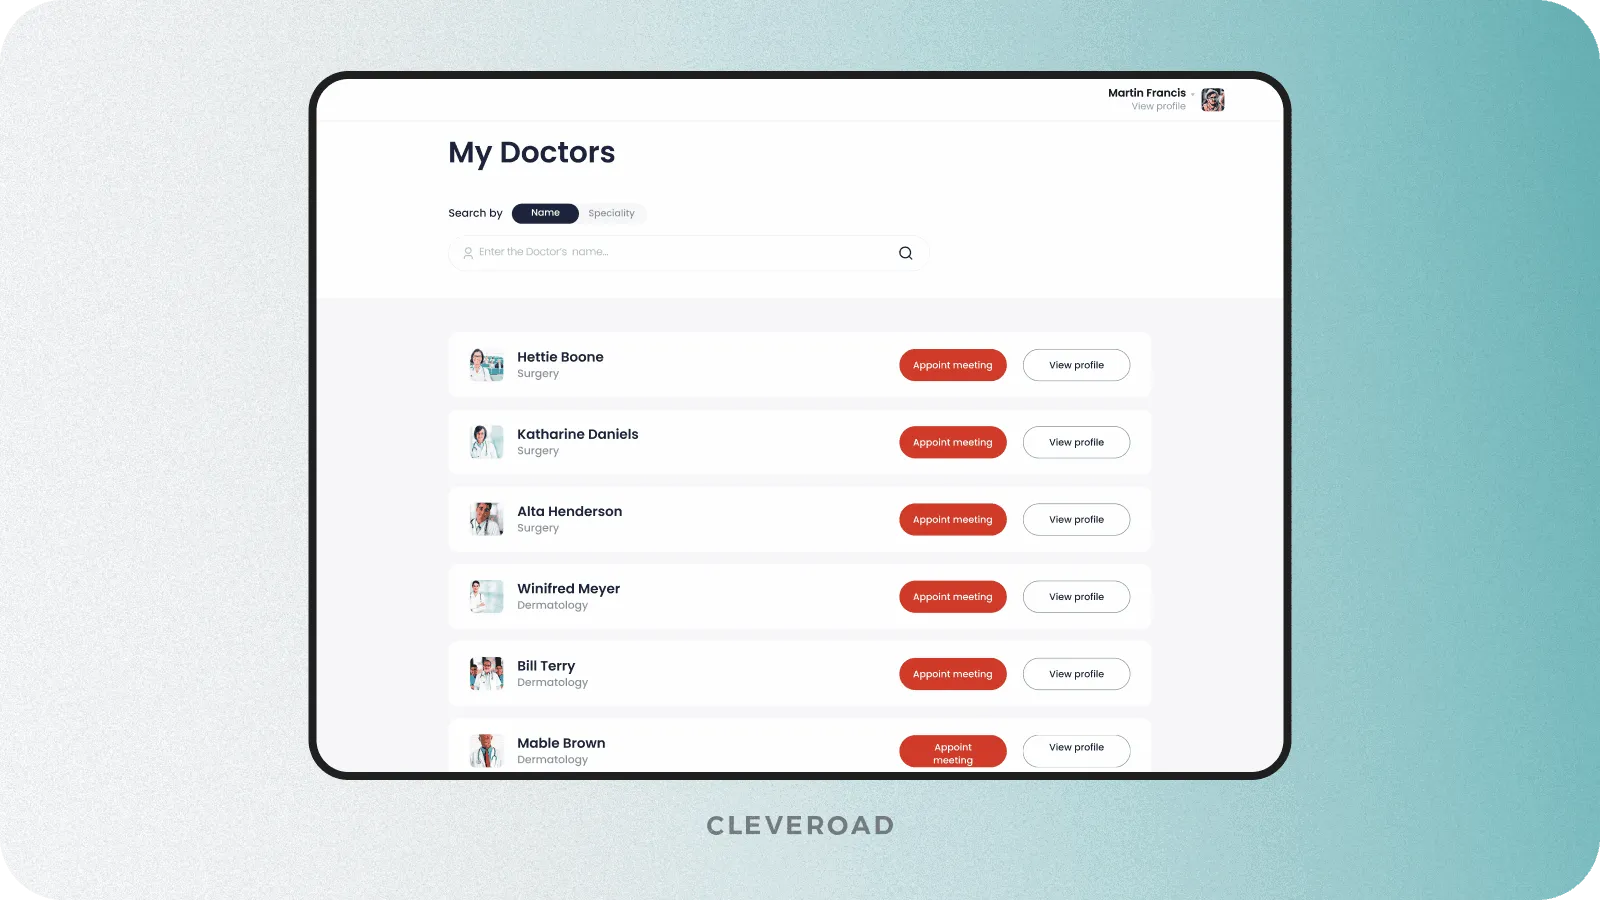 Example of a telemedicine app for making appointments made by Cleveroad